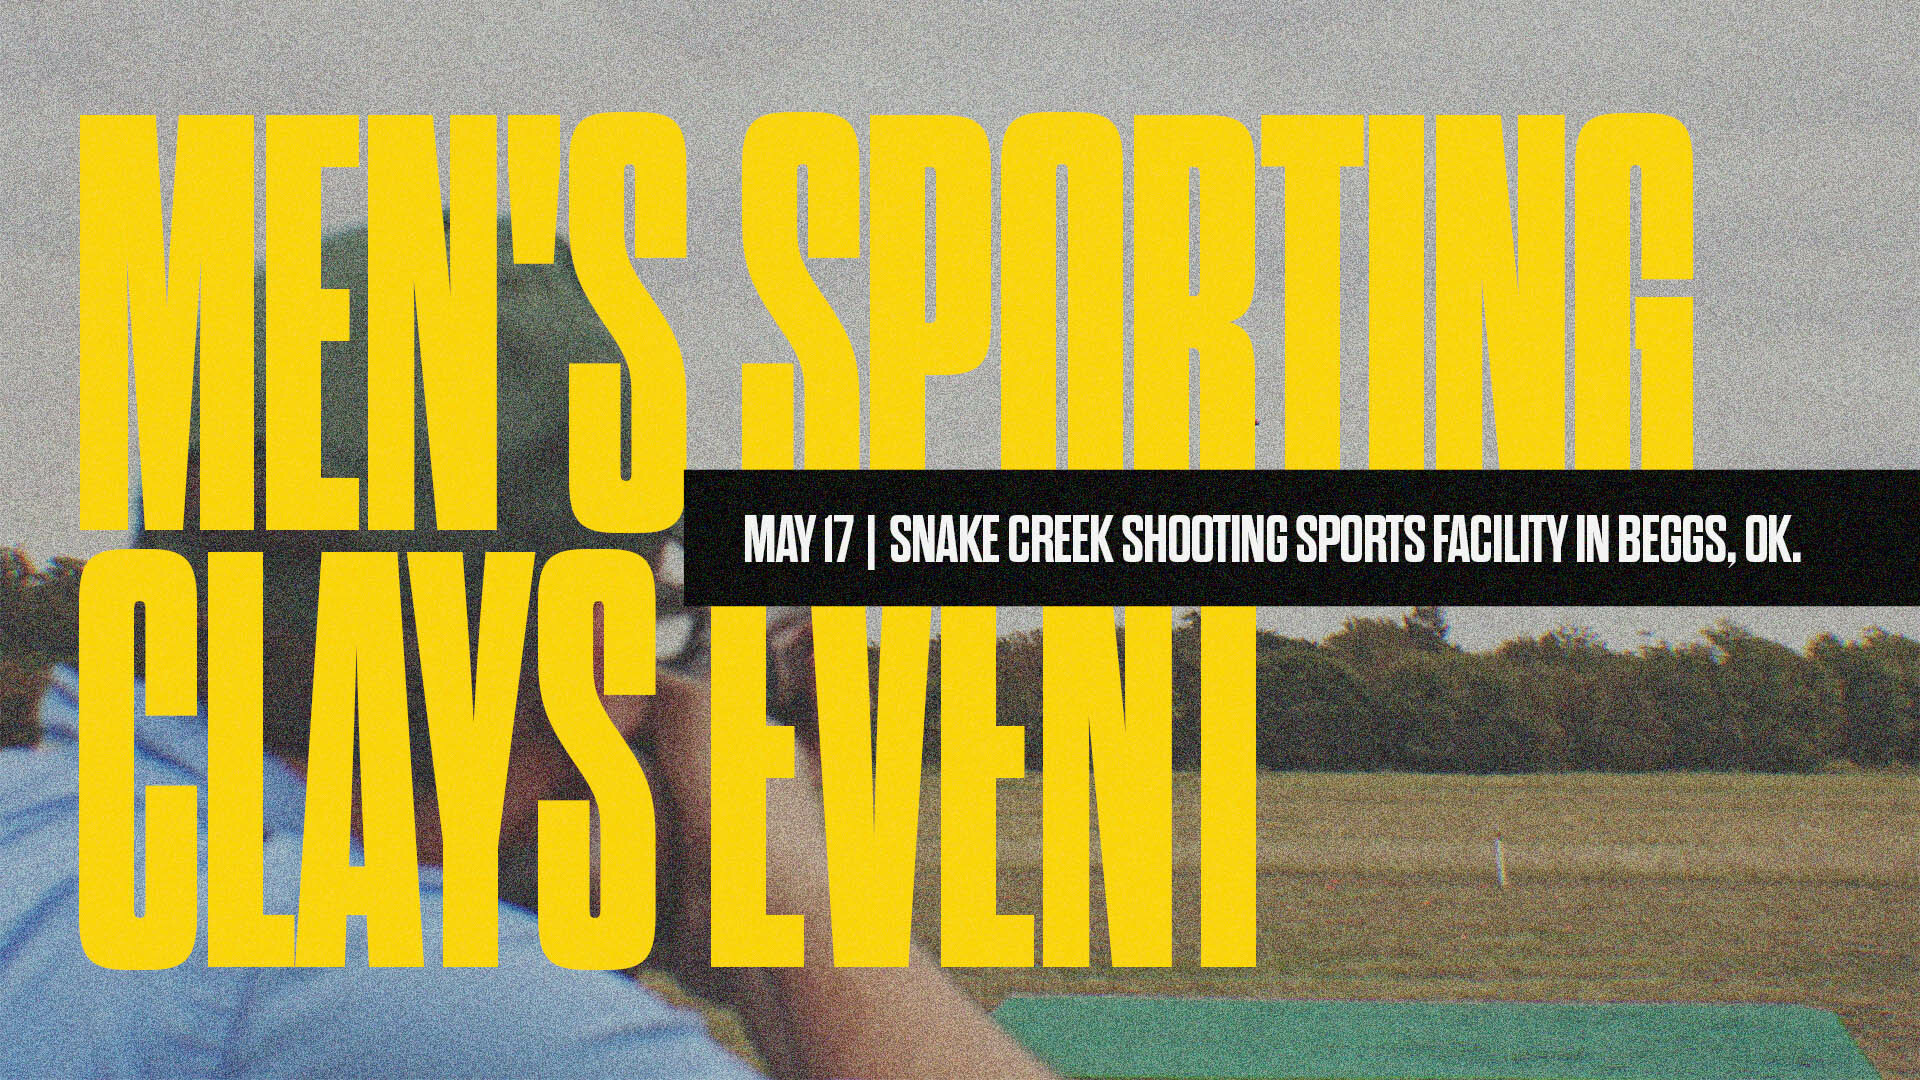 Men's Sporting Clays Event